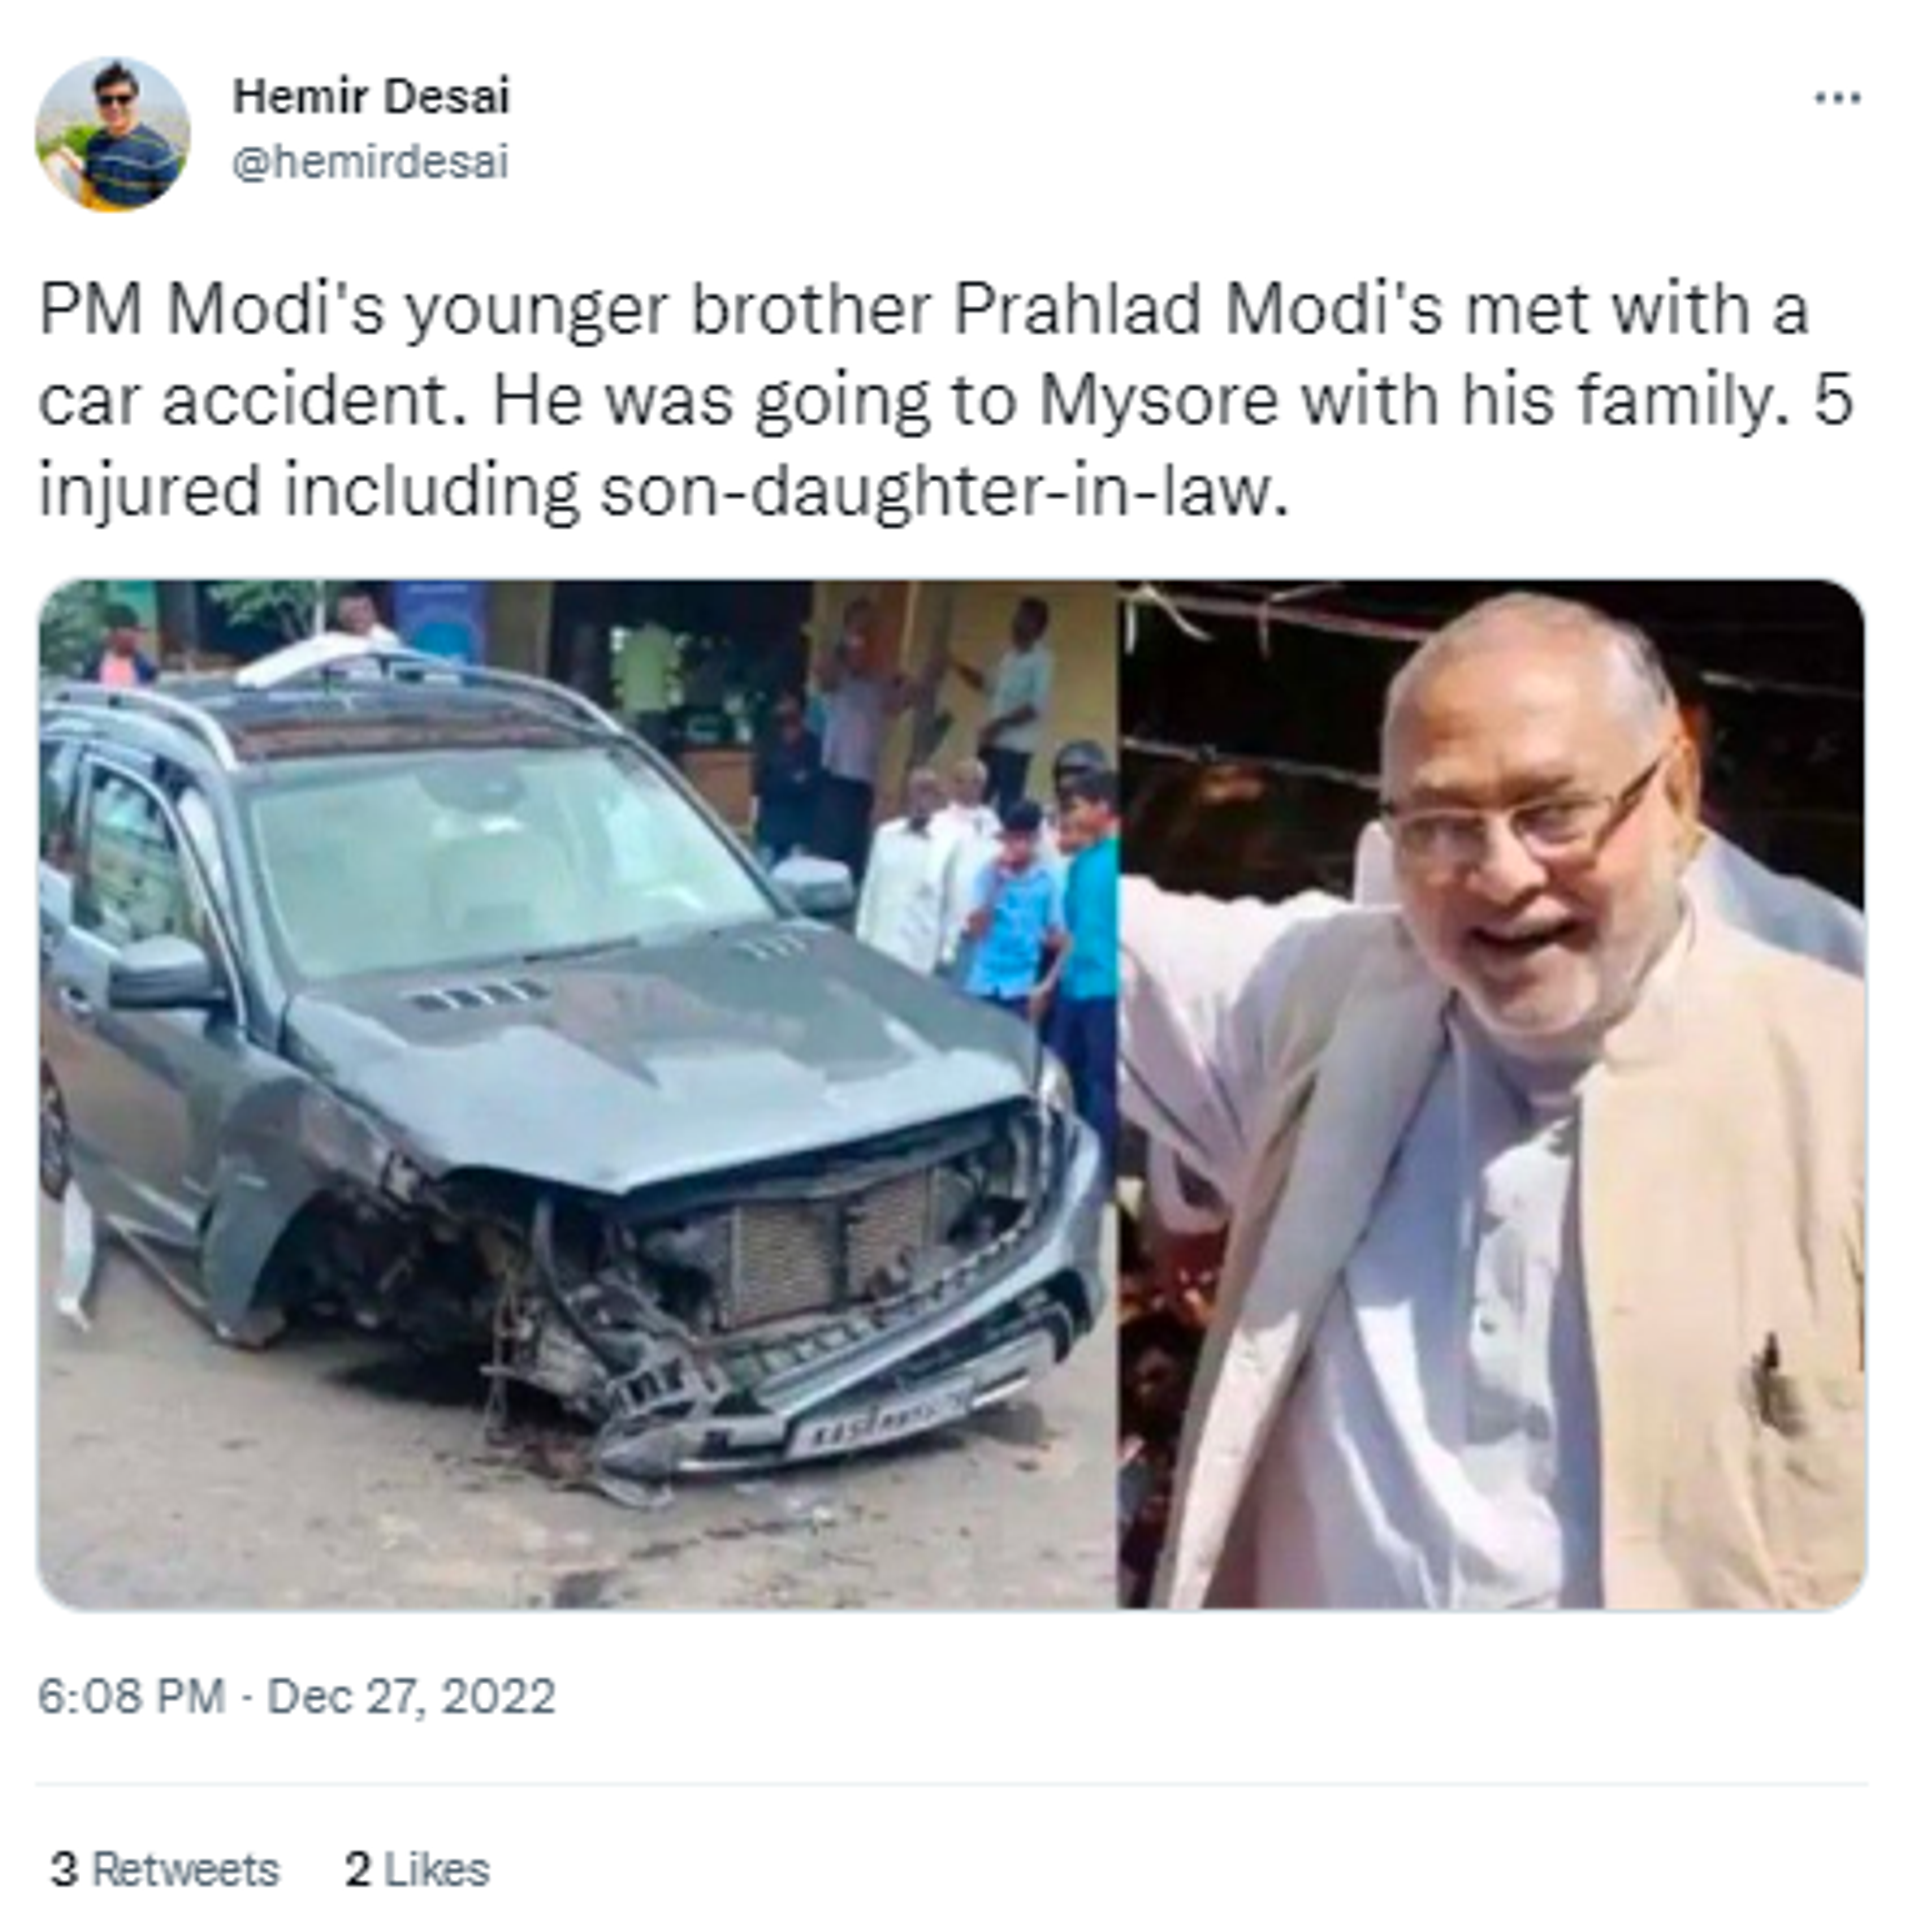 PM Modi's Brother, Family Critically Injured in Road Accident in India - Sputnik India, 1920, 27.12.2022